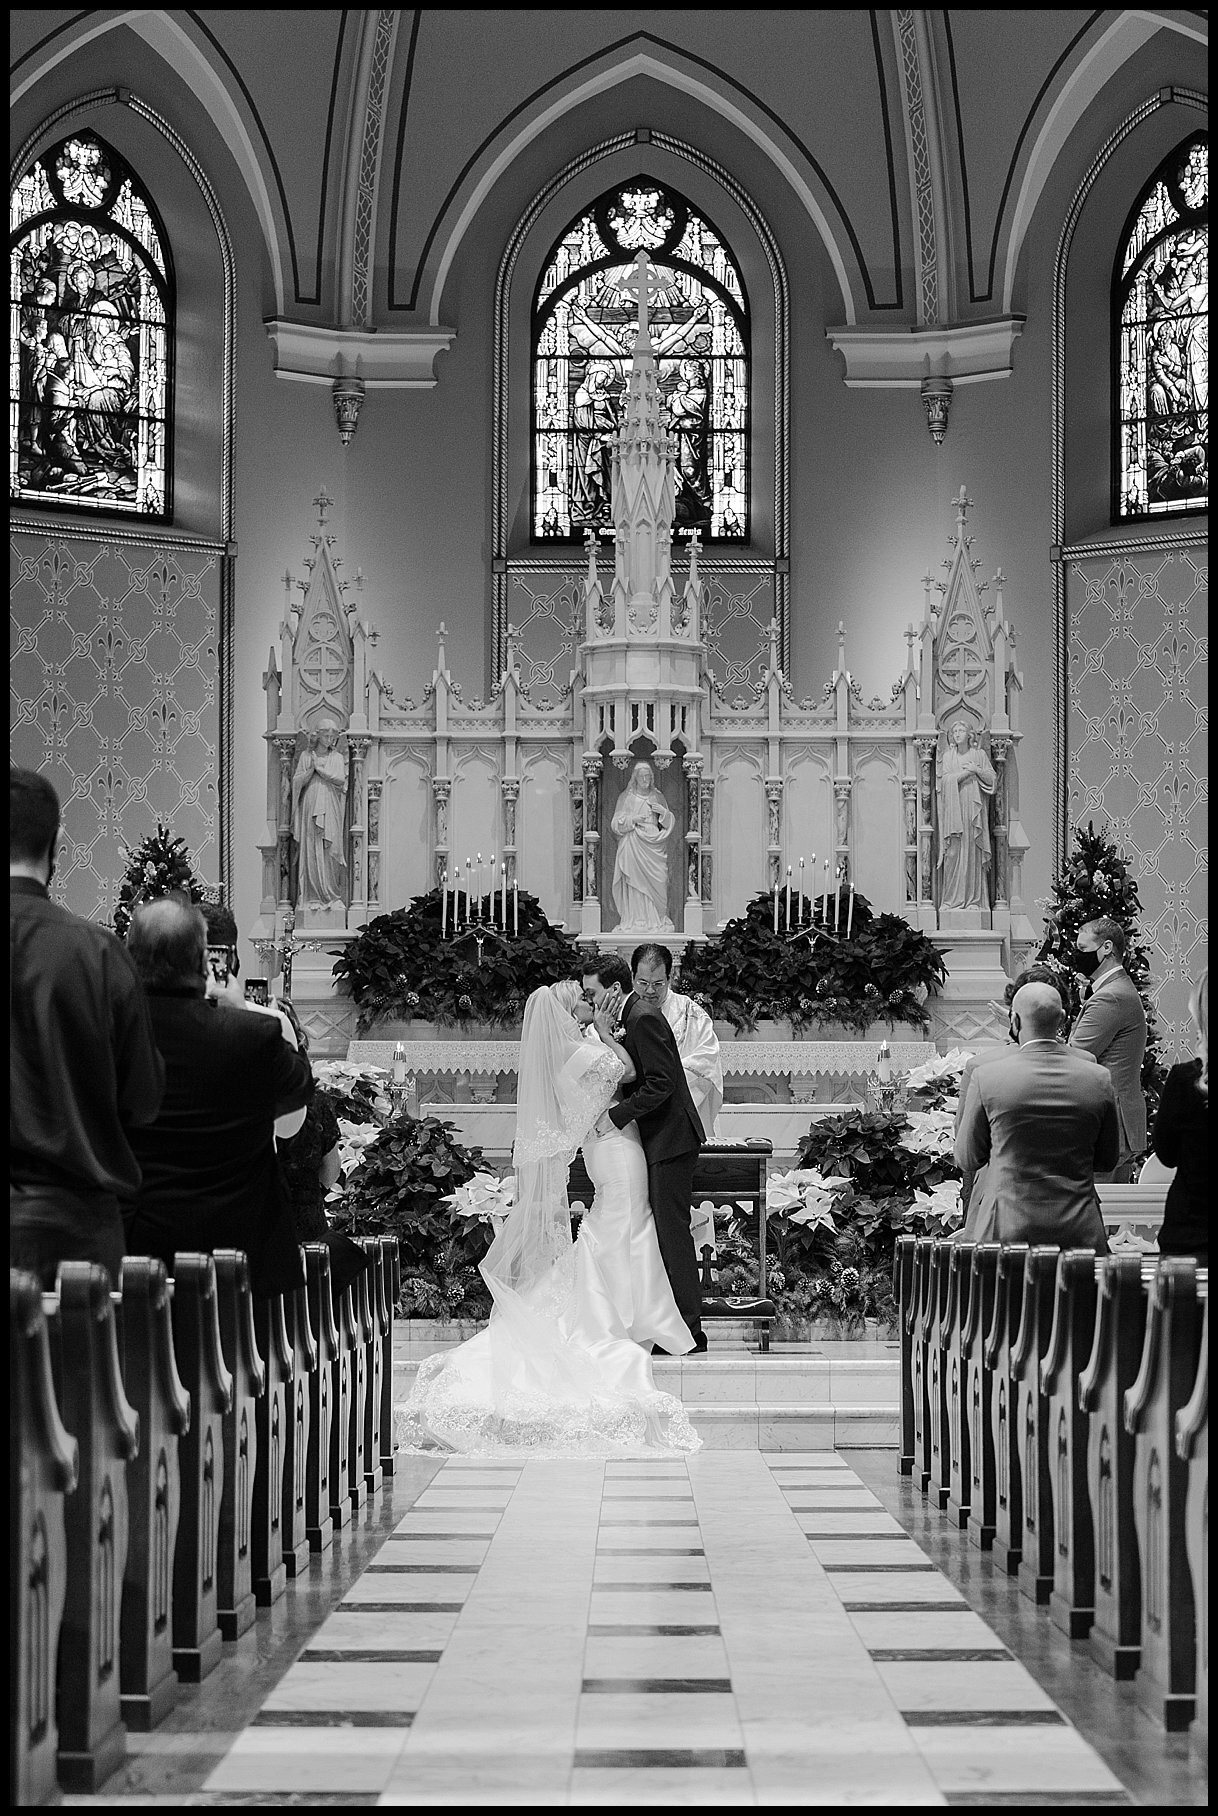  Bride and groom first kiss at catholic wedding ceremony in detroit, michigan.  